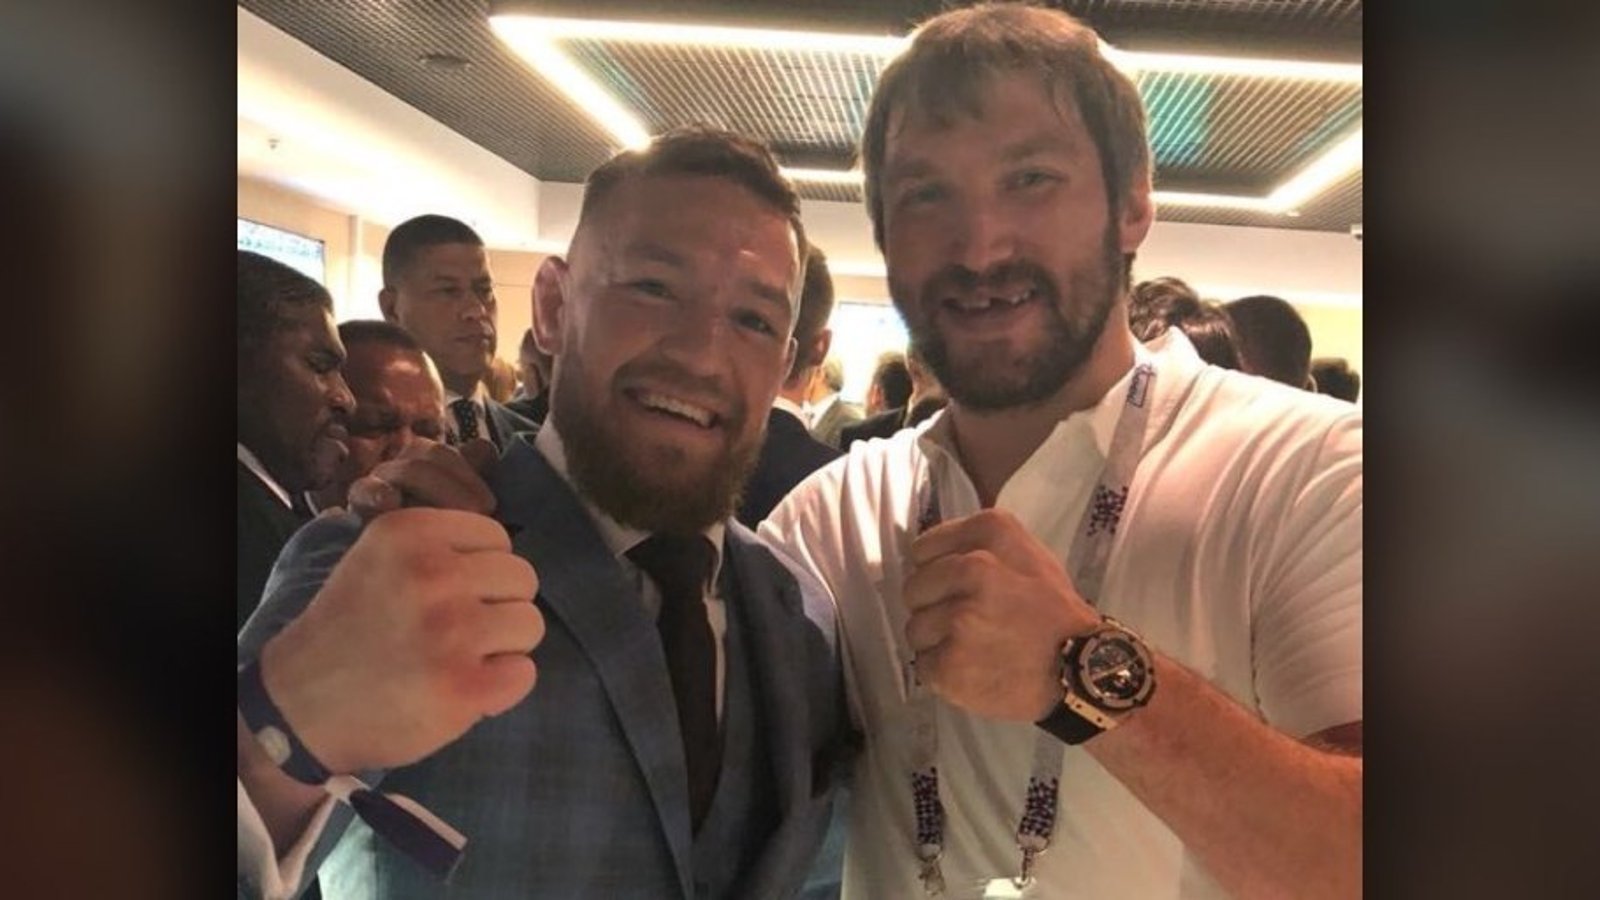 Knockout King Ovechkin gets special message from former UFC champion McGregor 